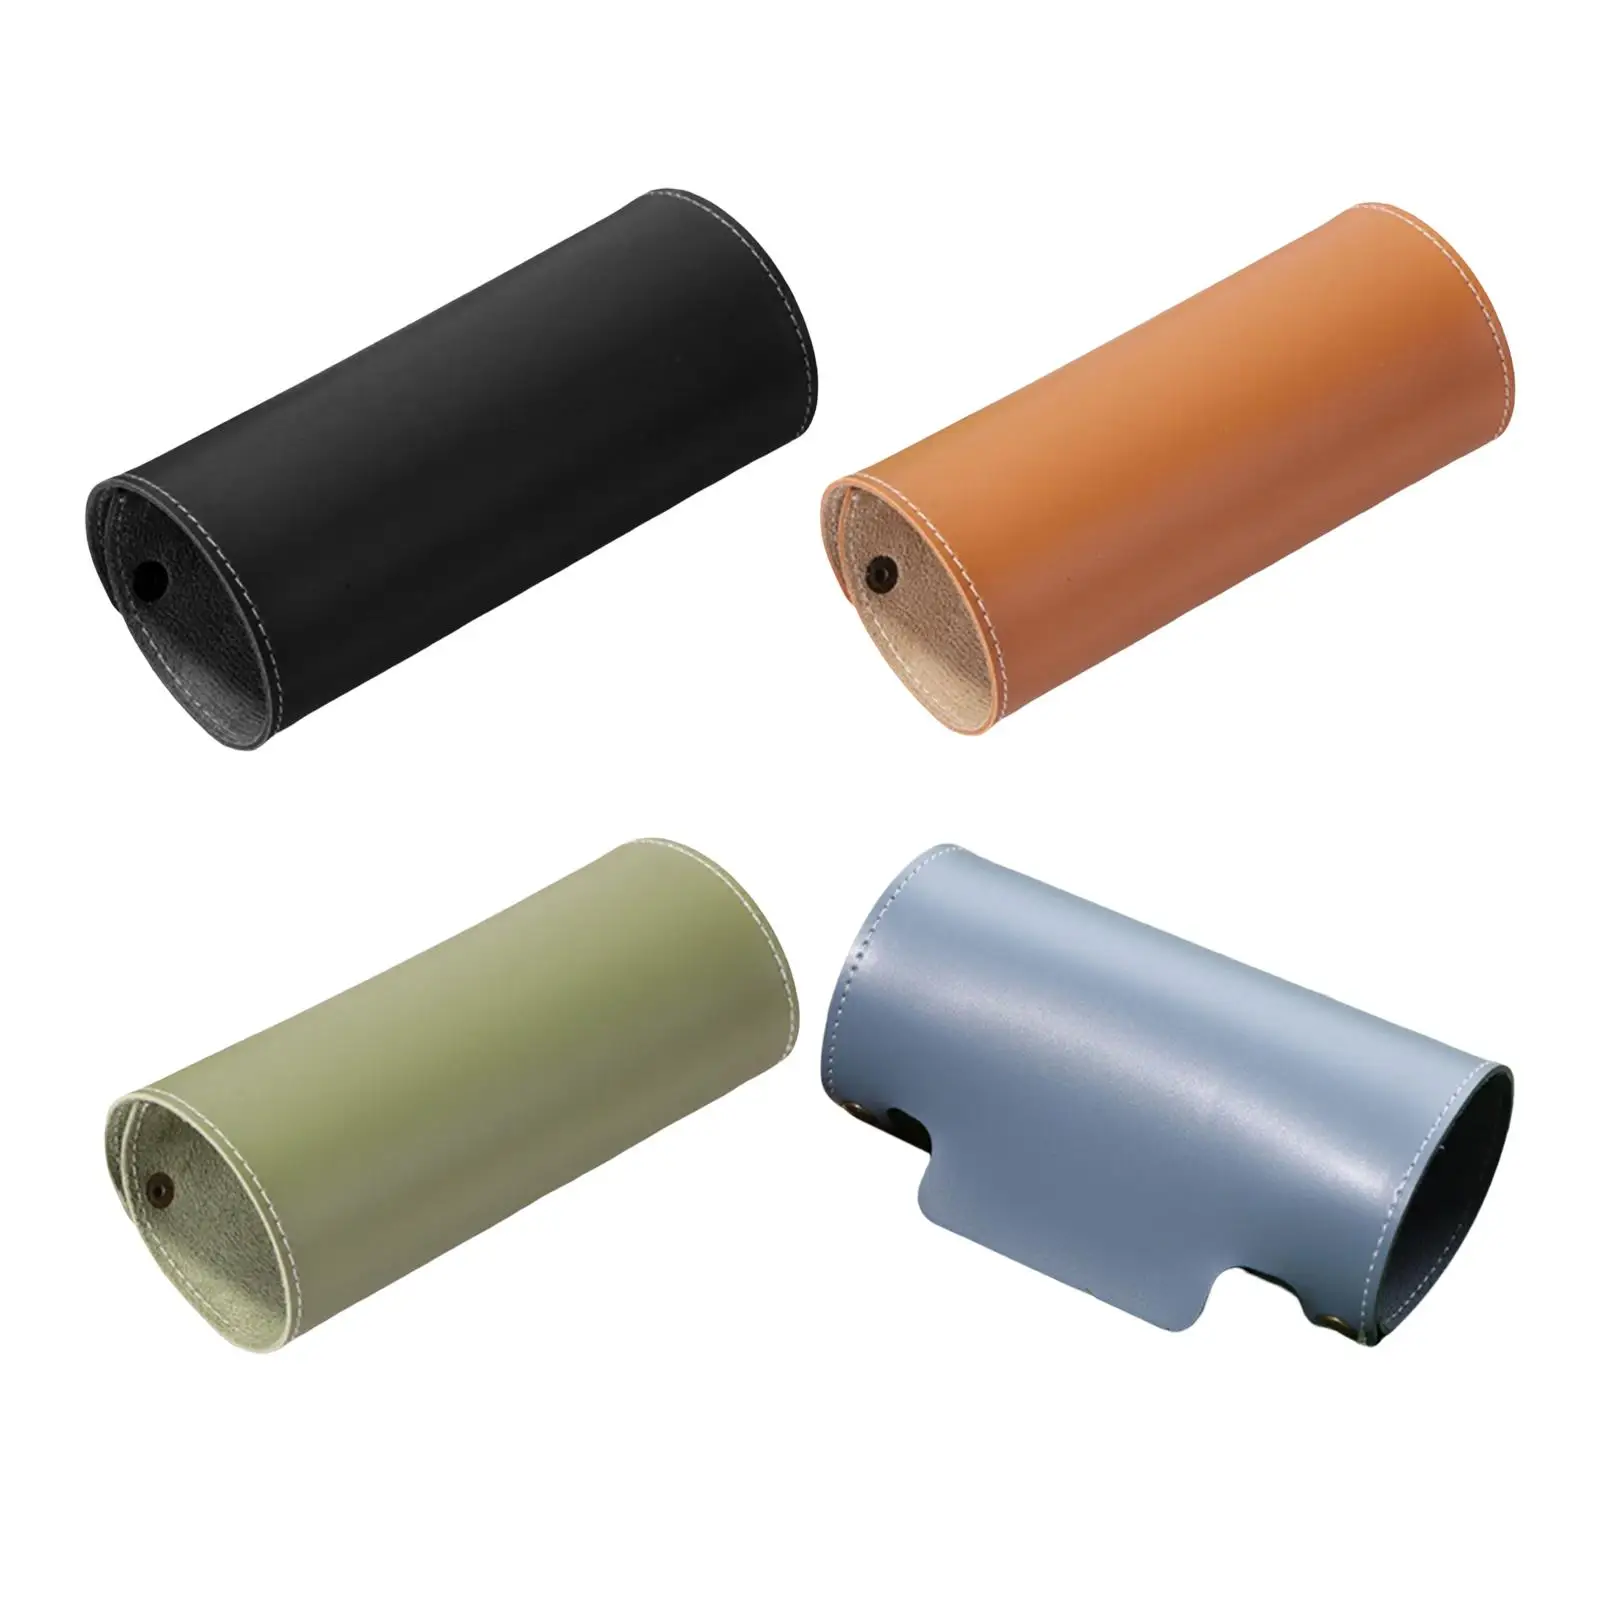 Gas Canister Cover Artificial Leather Protective Case for Party Picnic BBQ